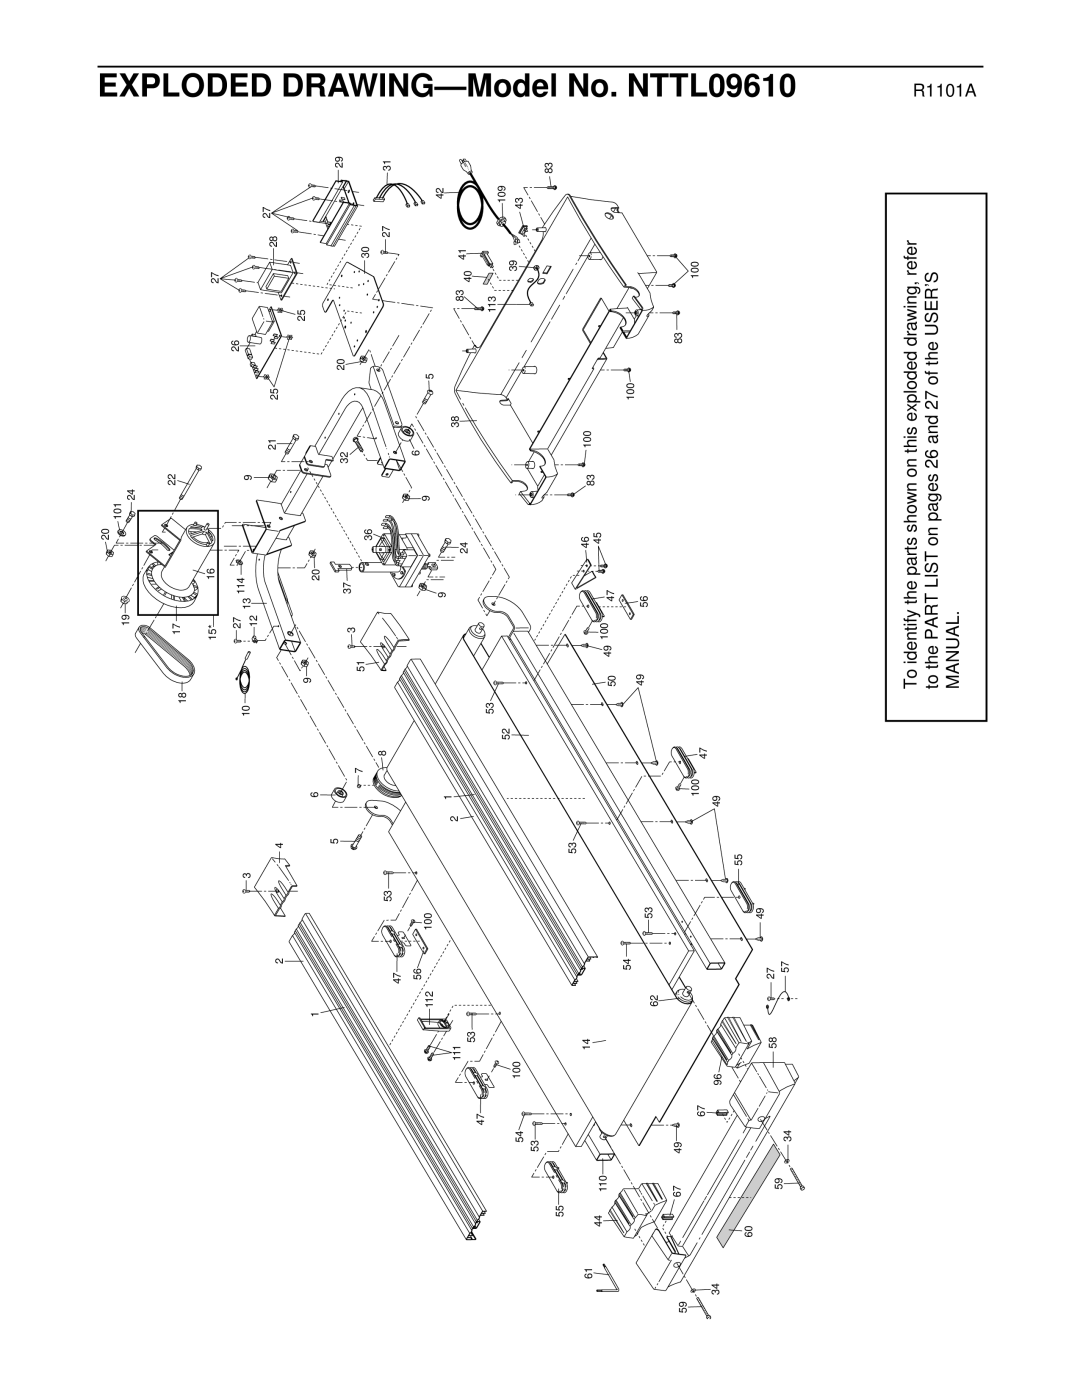 NordicTrack user manual 3220, 83 40 113, Exploded Drawing, Model No. NTTL09610, R1101A 